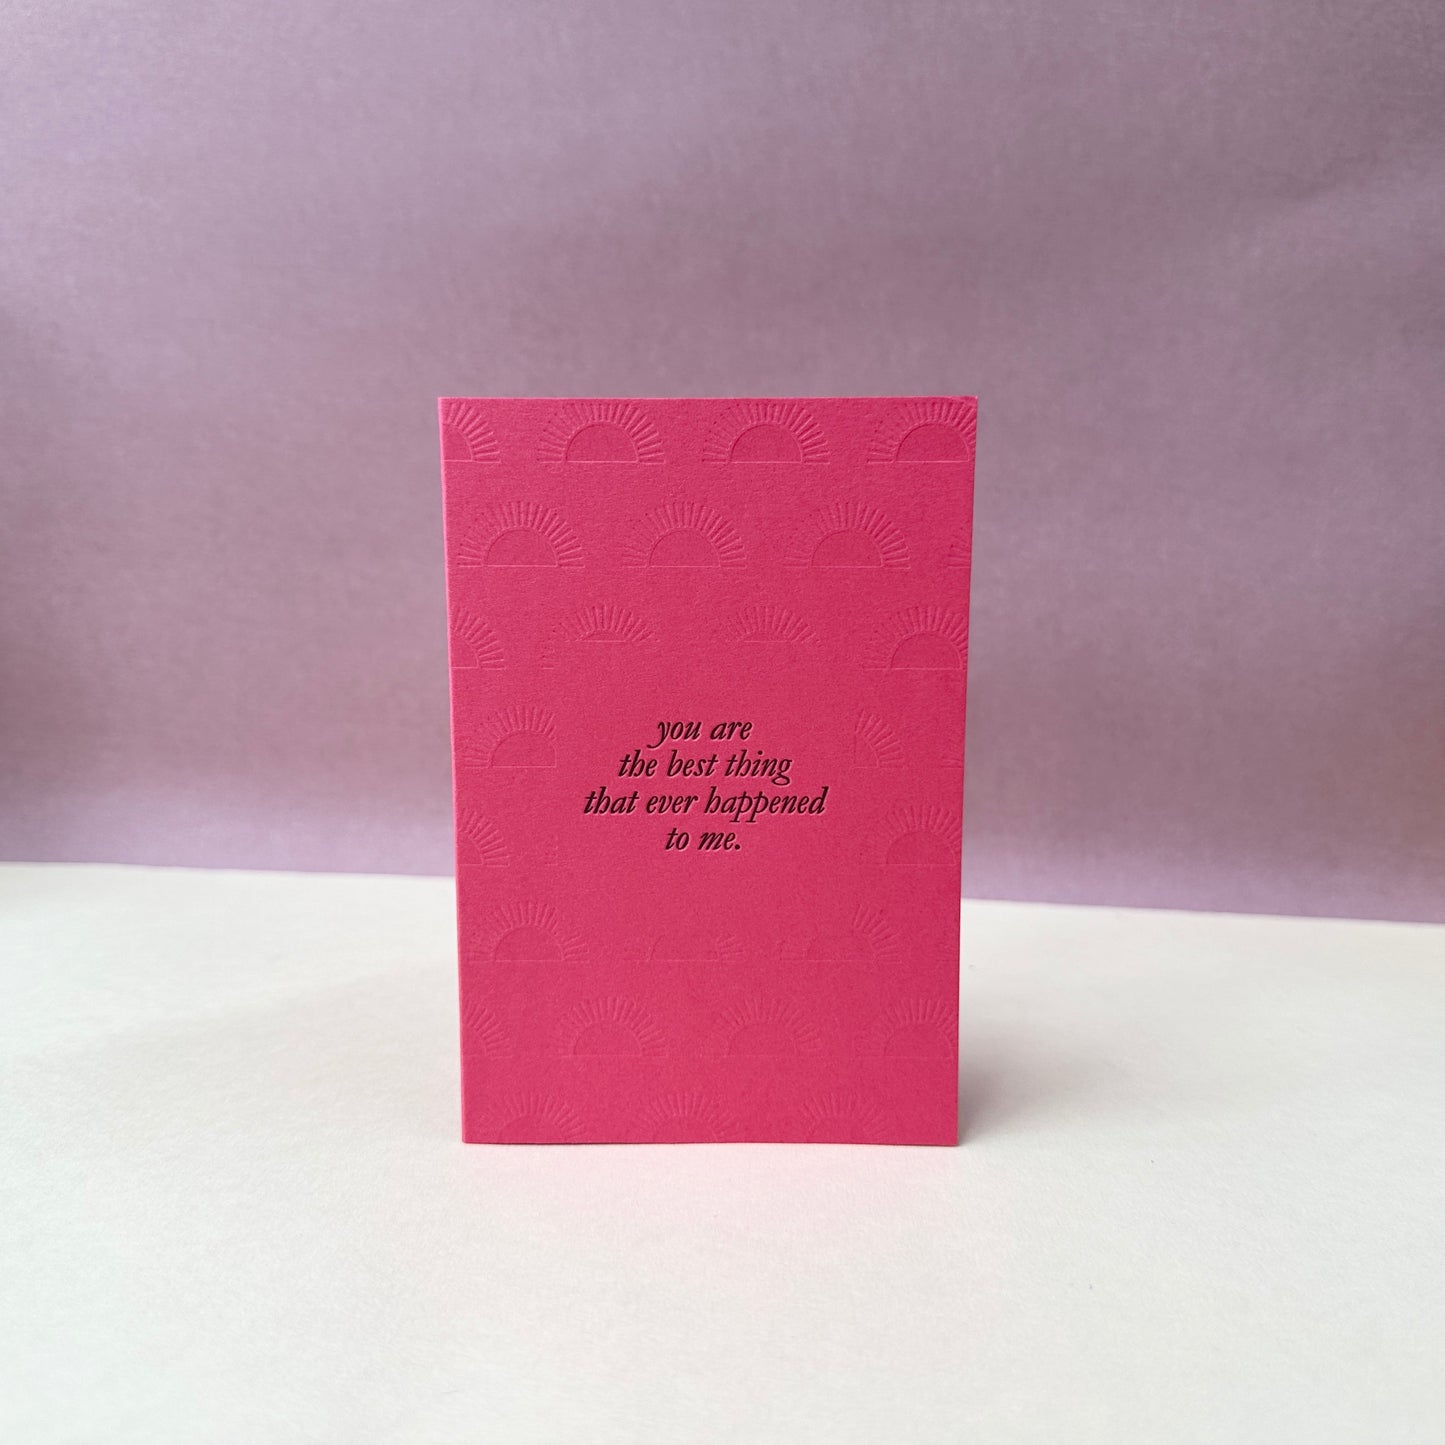 “You are the best” Letterpress Card